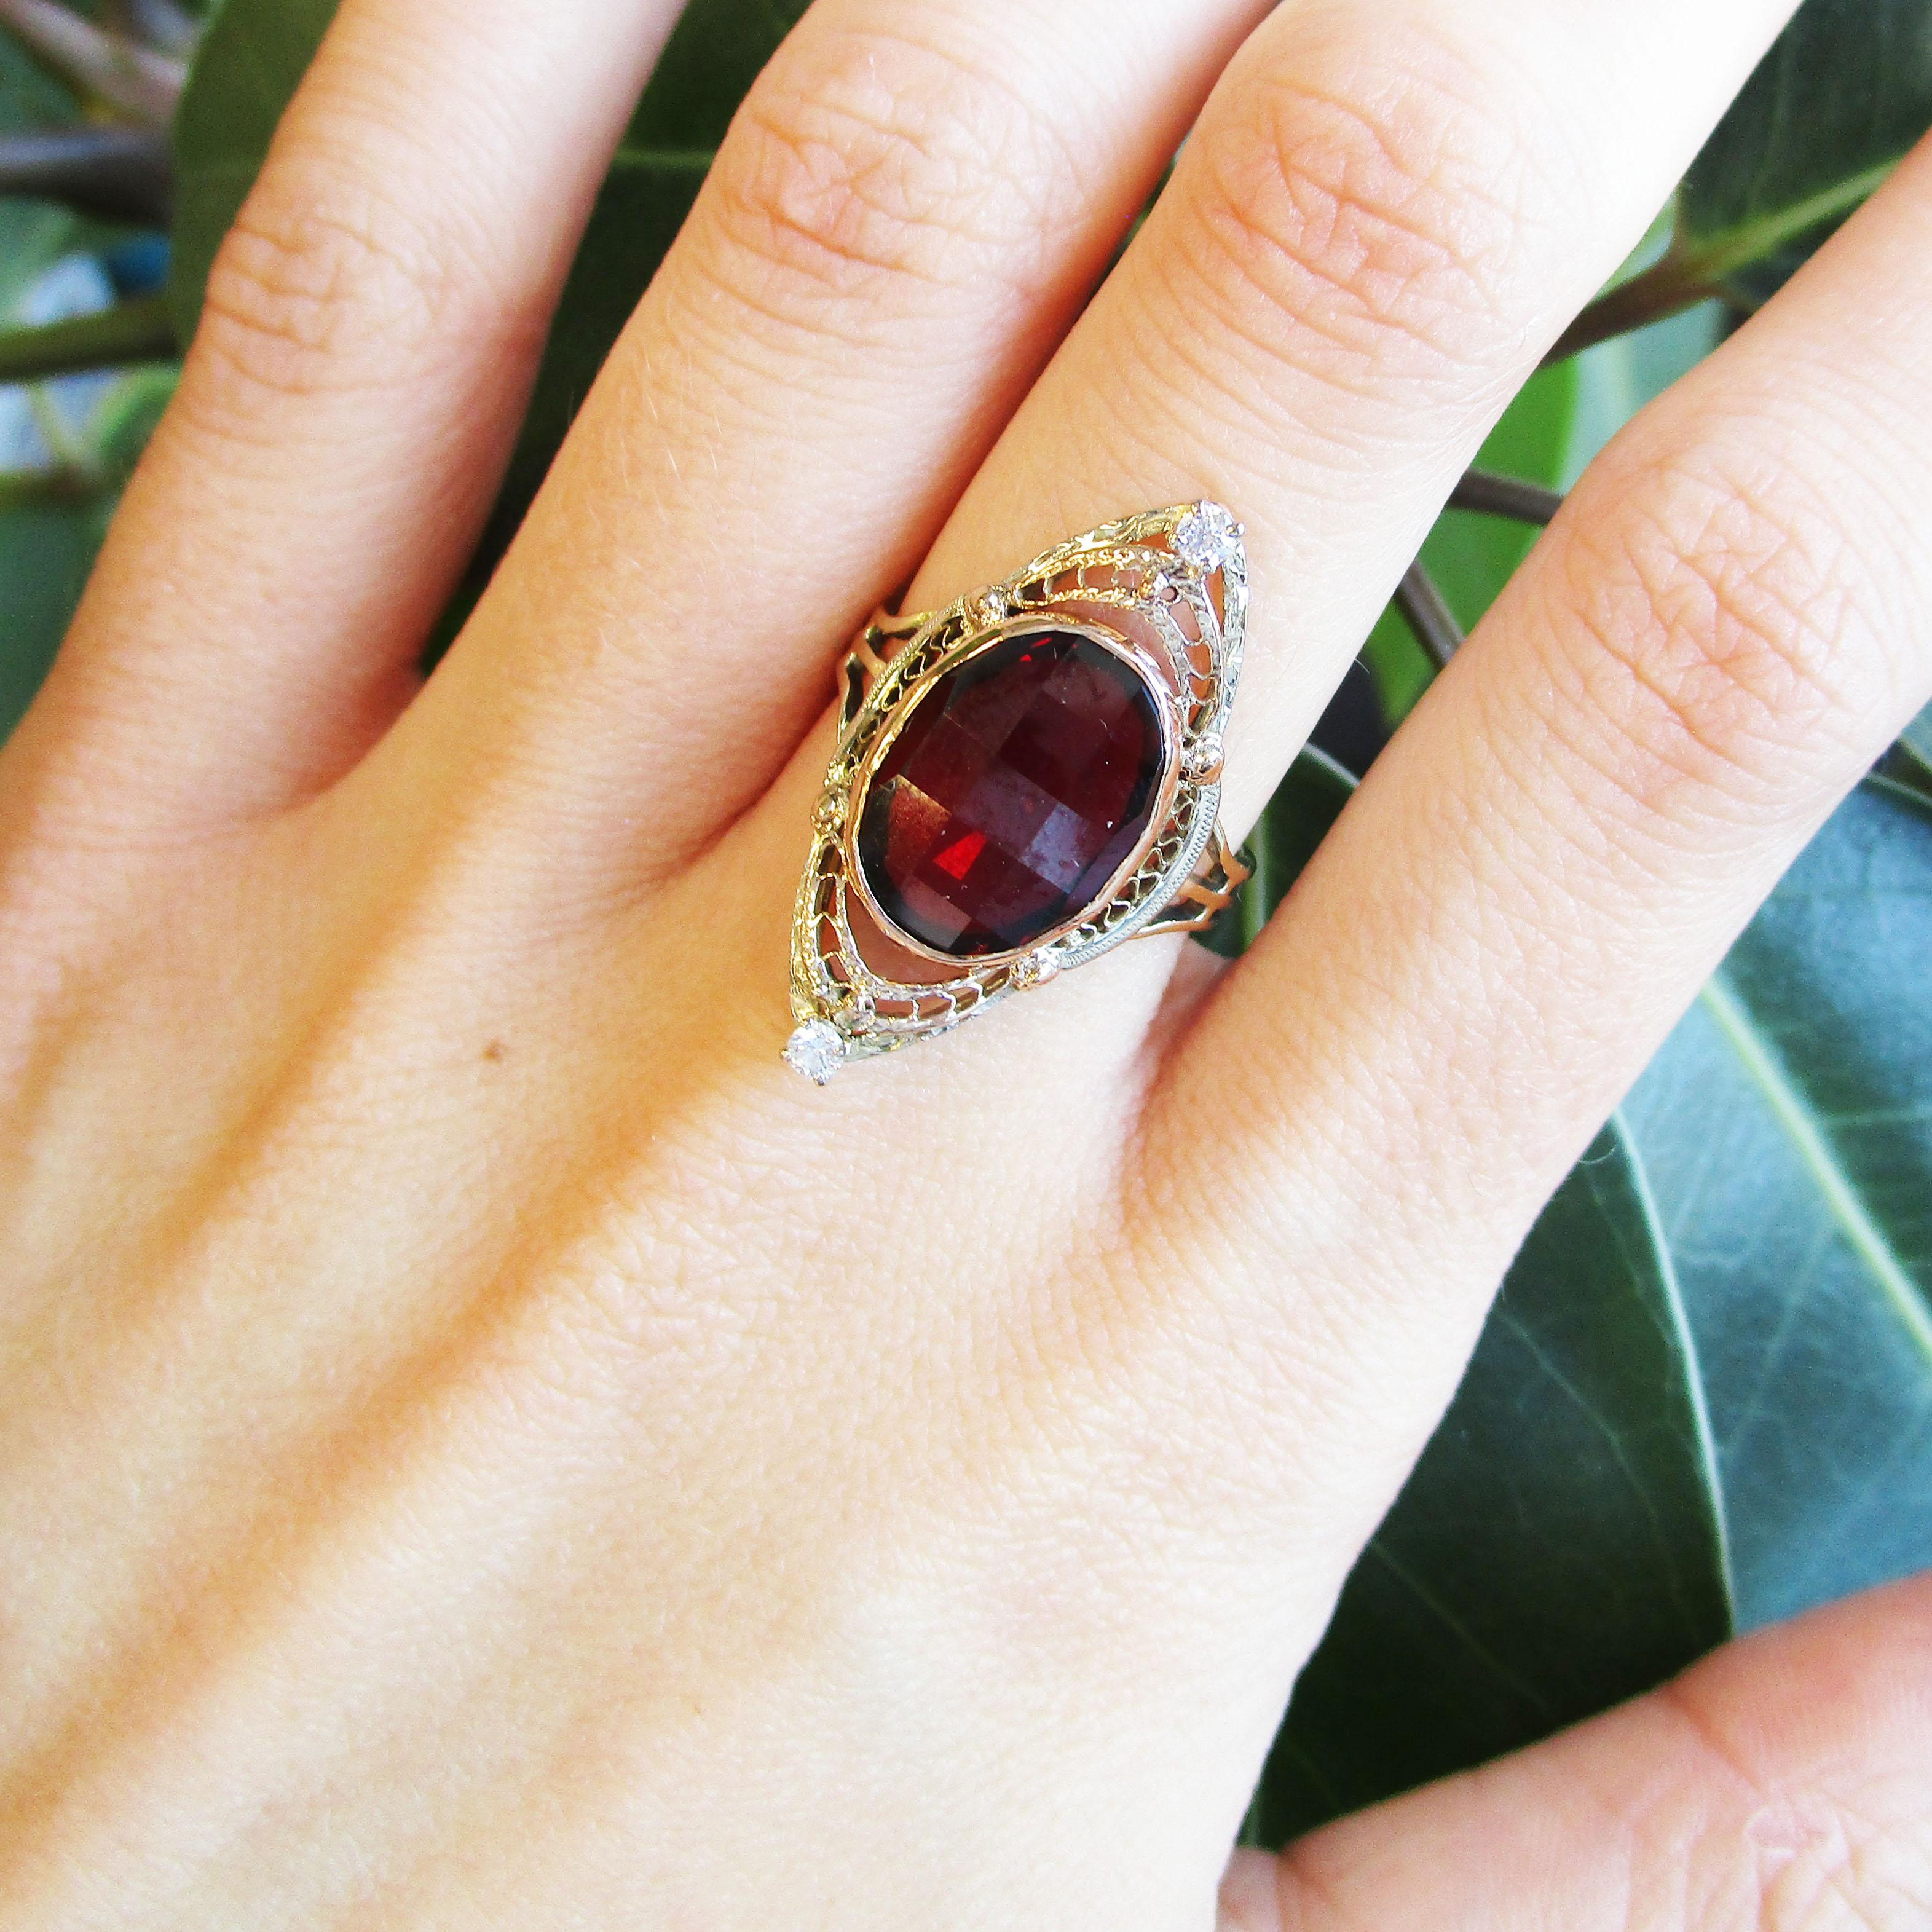 This is an enchanting Art Deco ring featuring two colors of 14k gold in a dramatic, long layout with a garnet center and two delicate diamond accents. The garnet has a finely detailed filigree border in rose and white gold that come together to form